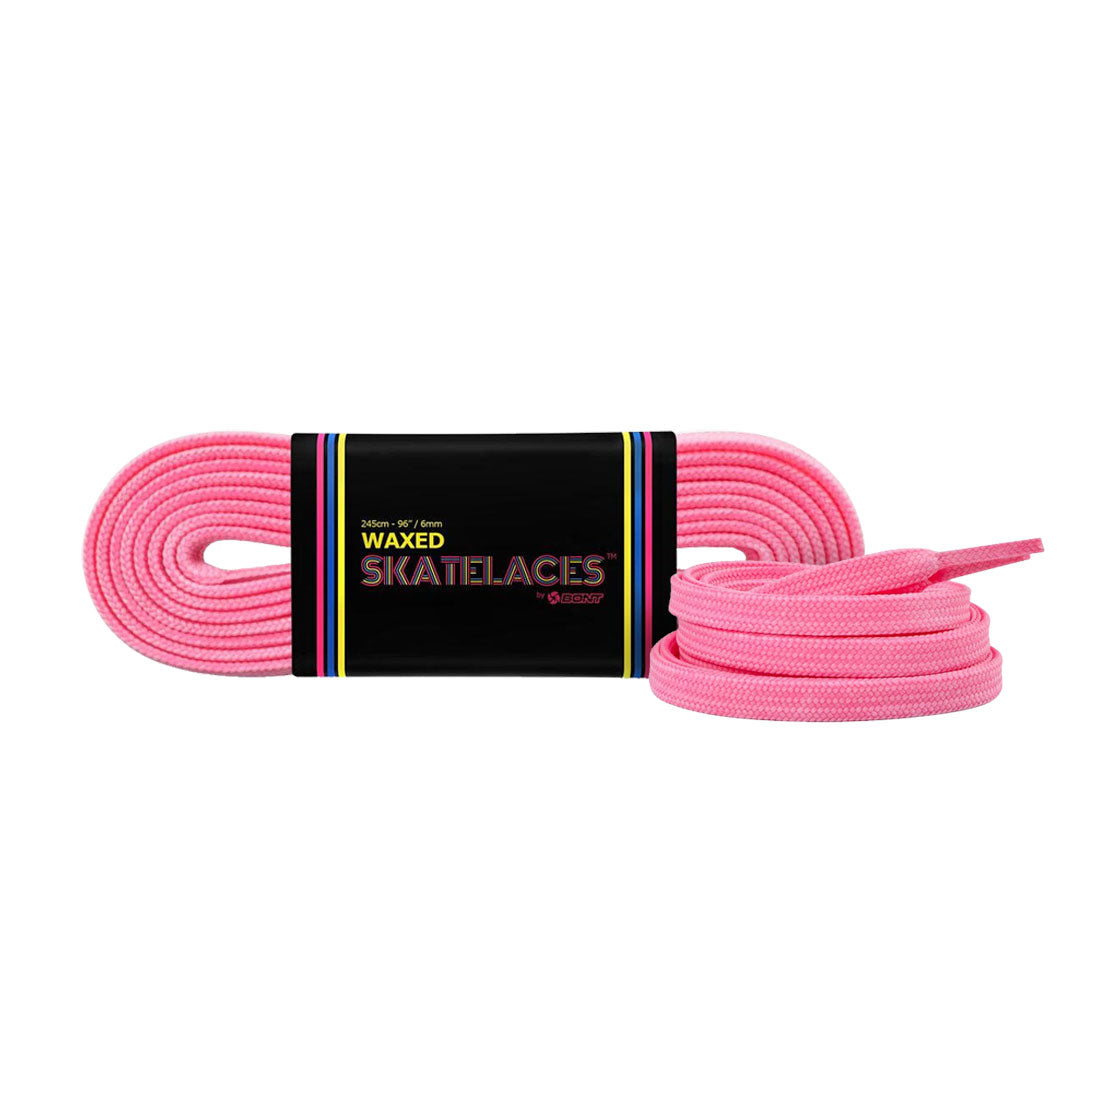 Bont Waxed 6mm Laces - 245cm/96in Cosmo Pink Laces